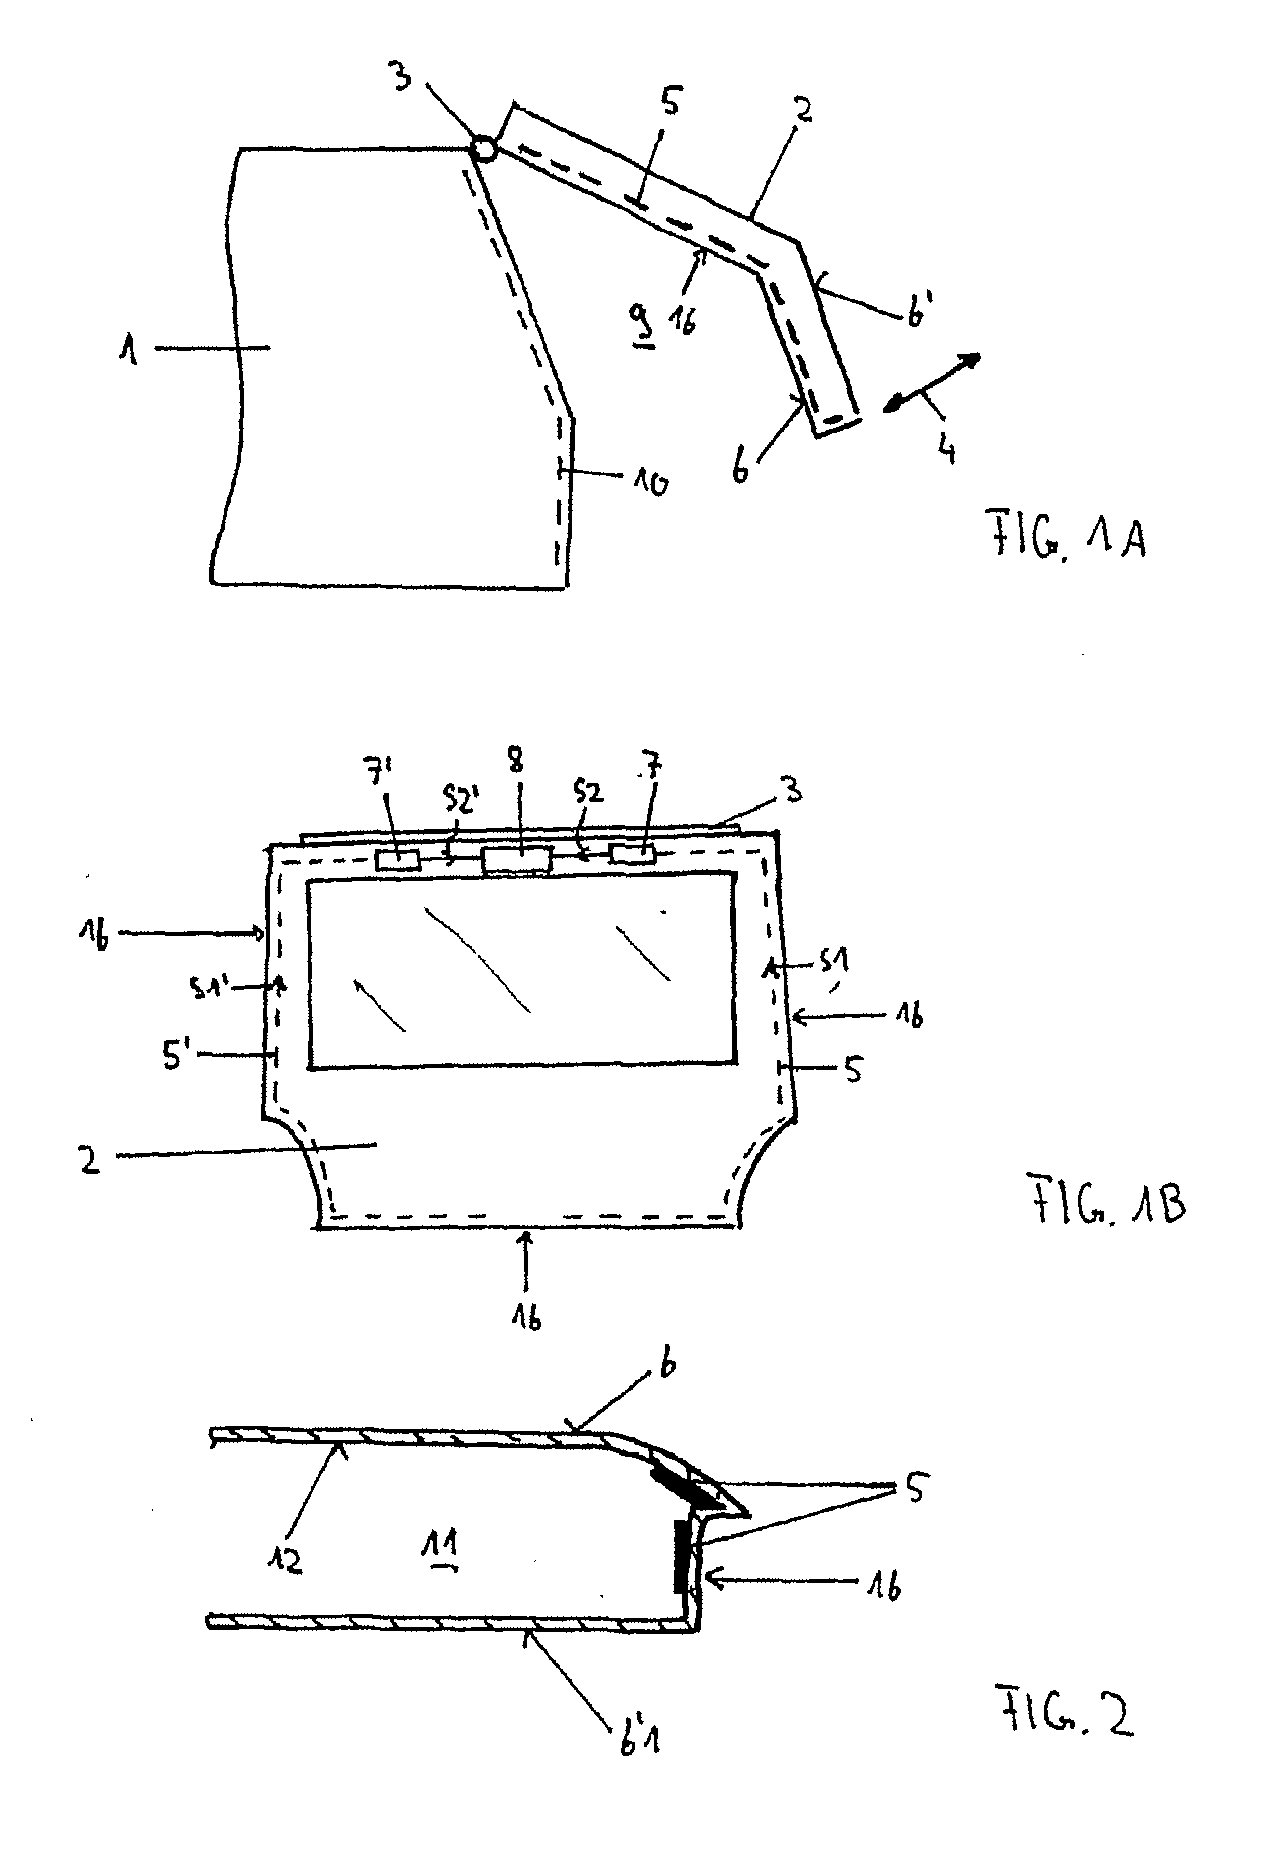 Motor-operated component with Anti-trapping means